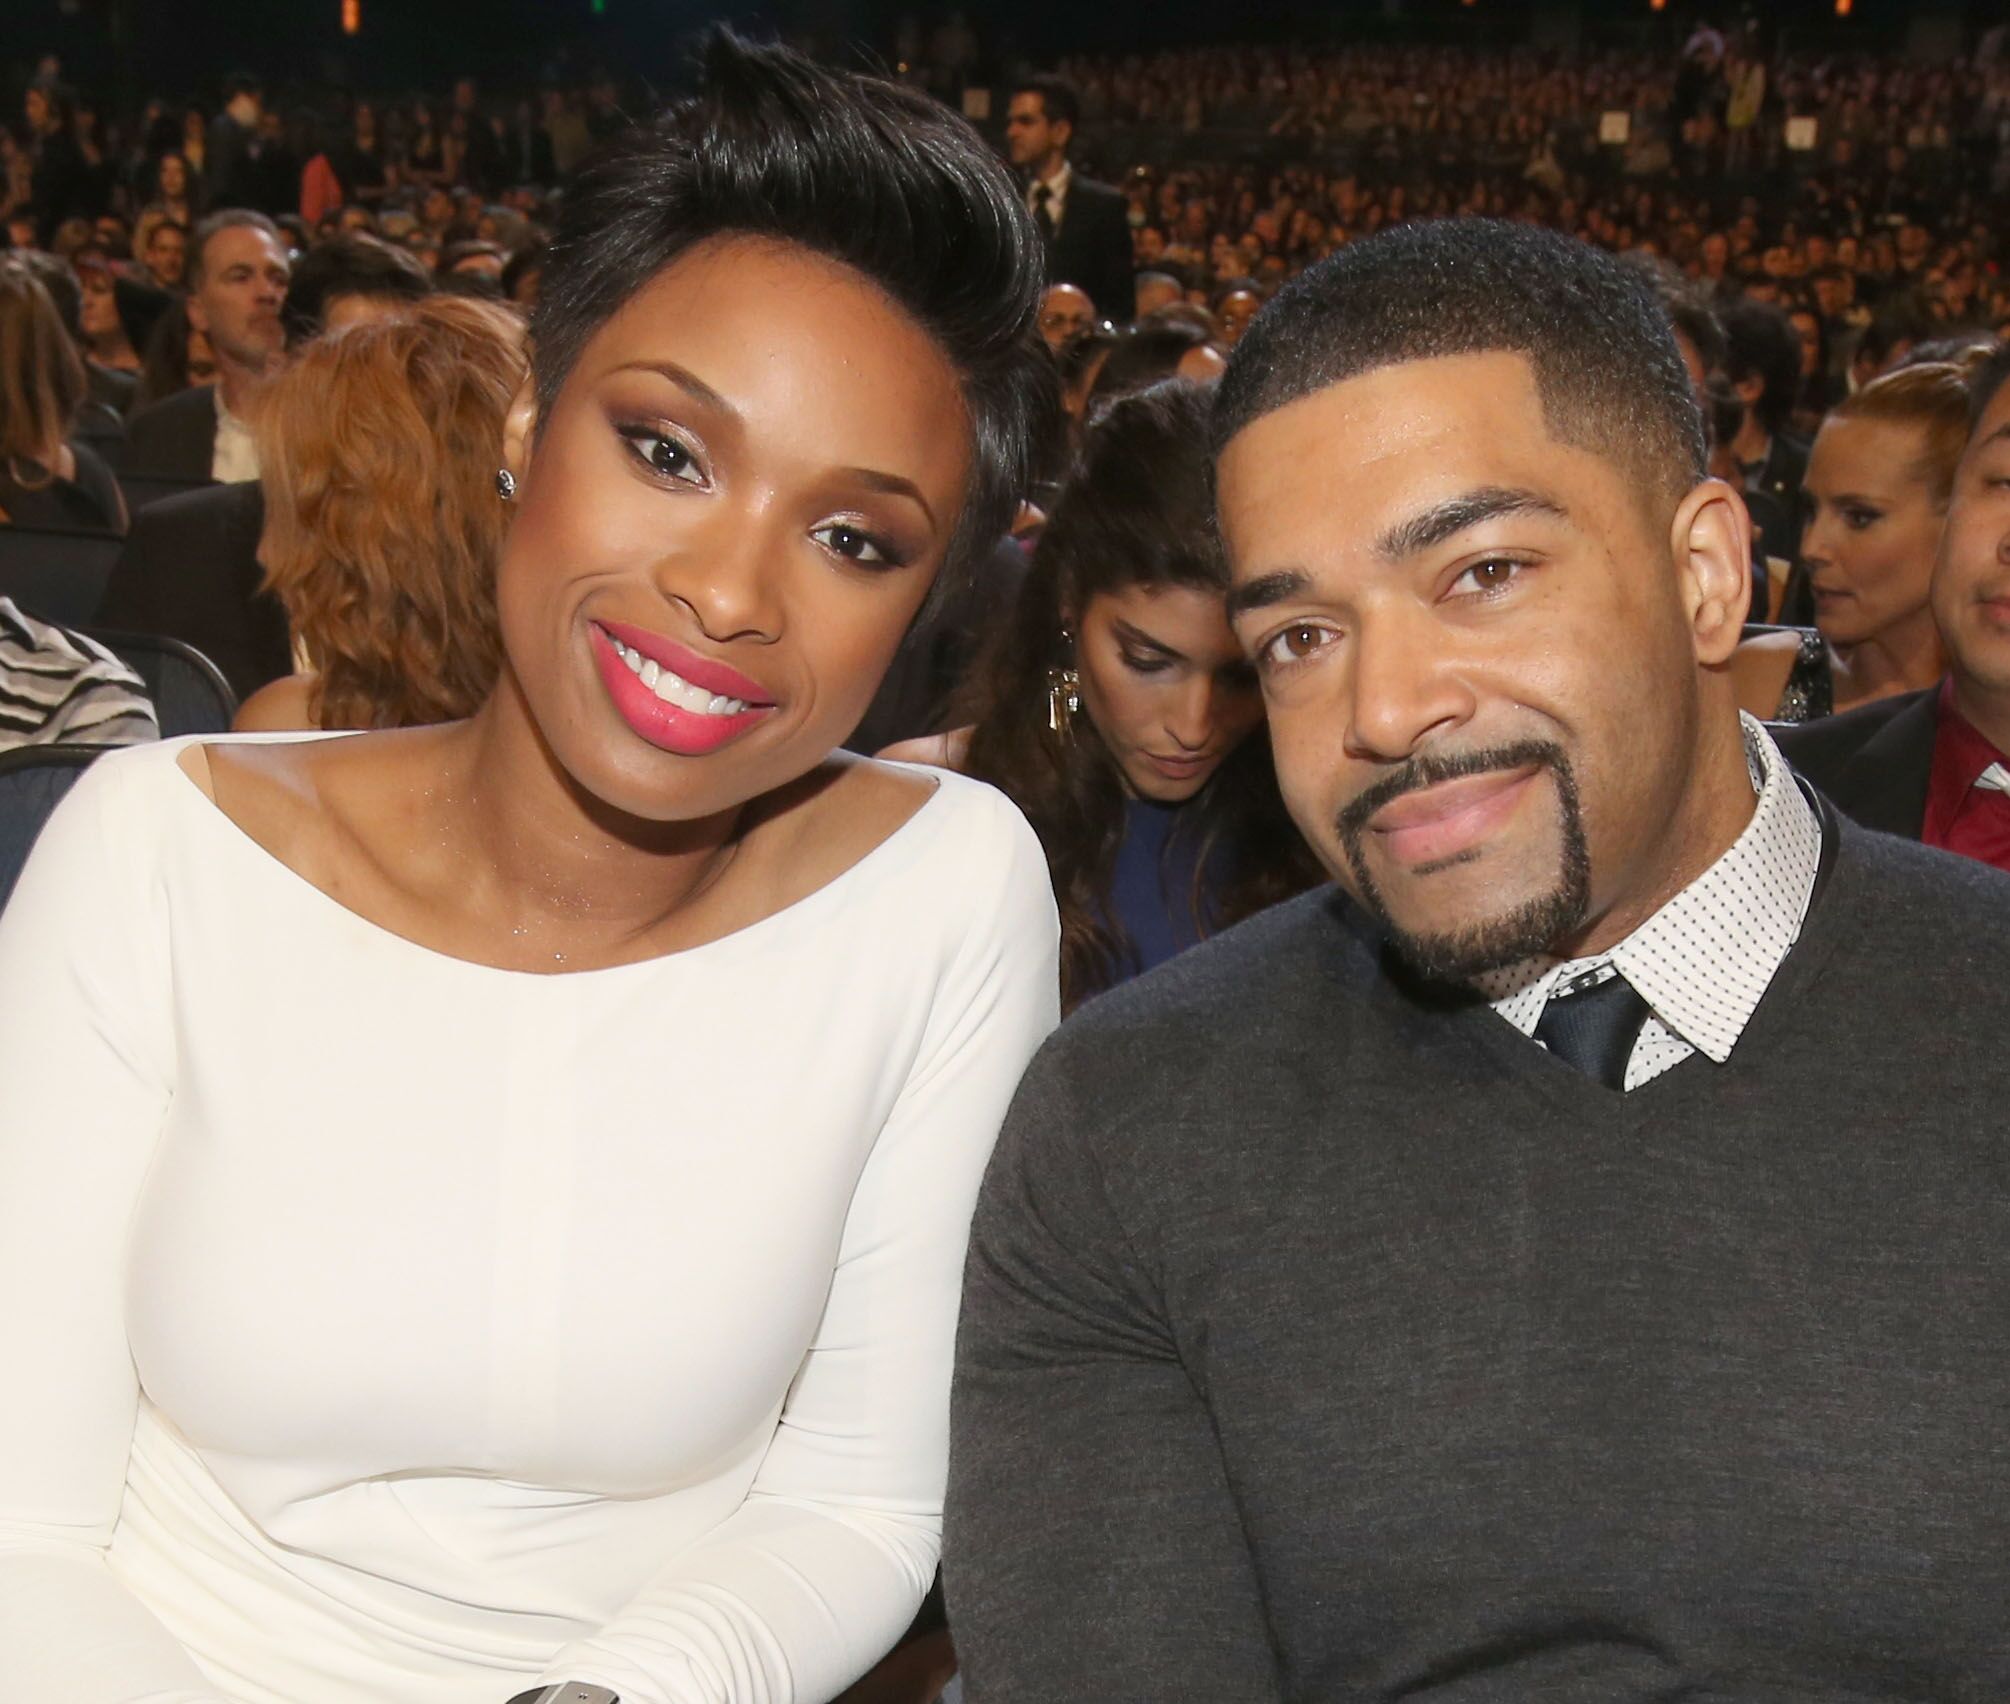 Jennifer Hudson and David Otunga attend The 40th Annual People's Choice Awards at Nokia Theatre L.A. Live on January 8, 2014 | Photo: Getty Images